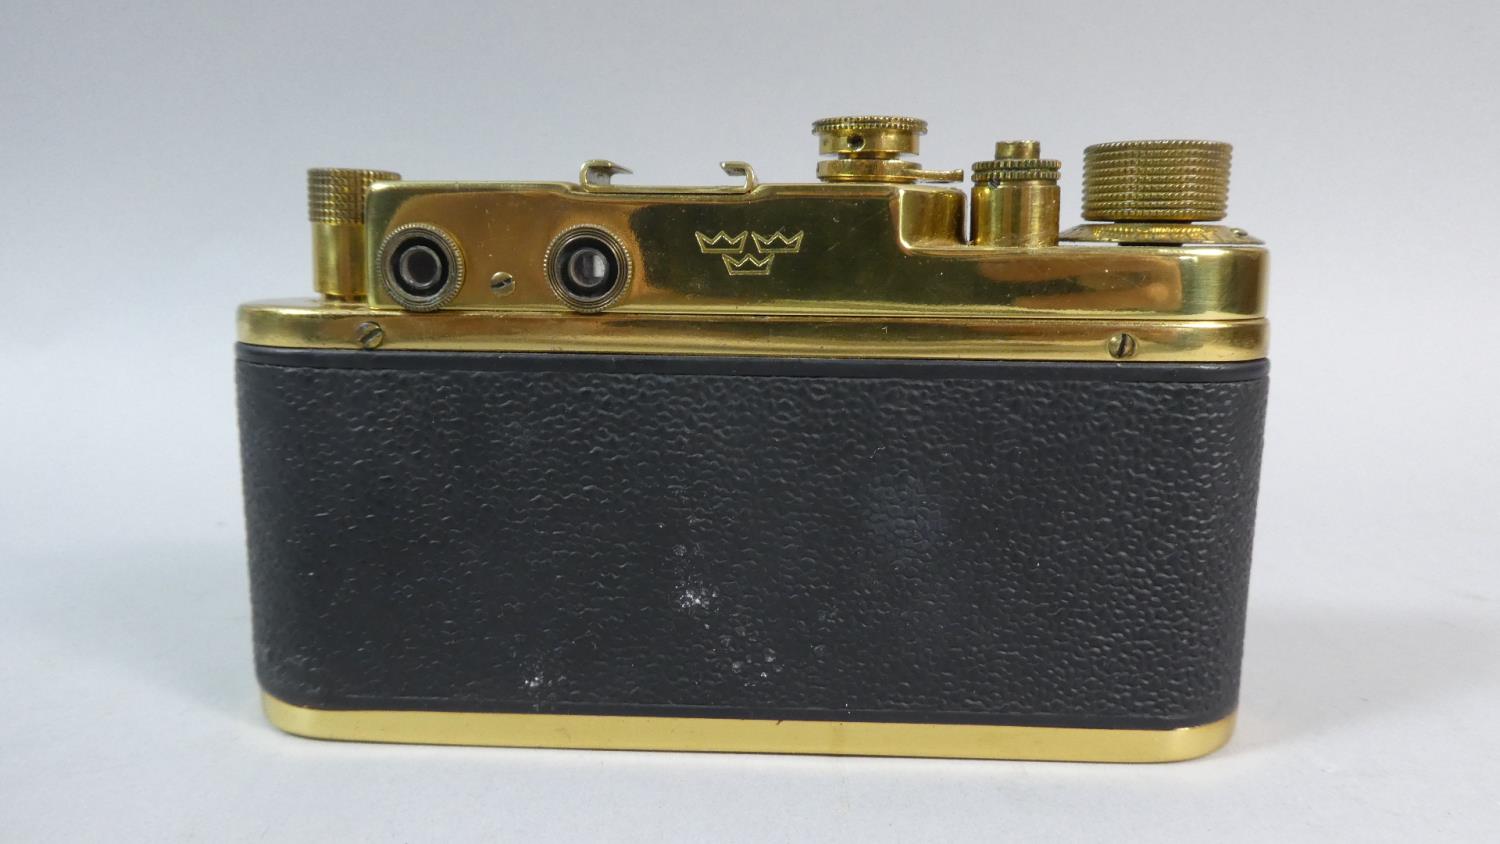 A Contemporary Brass Mounted Camera in the Leica style but formed from a FED 3 Camera body. (Not - Image 4 of 5